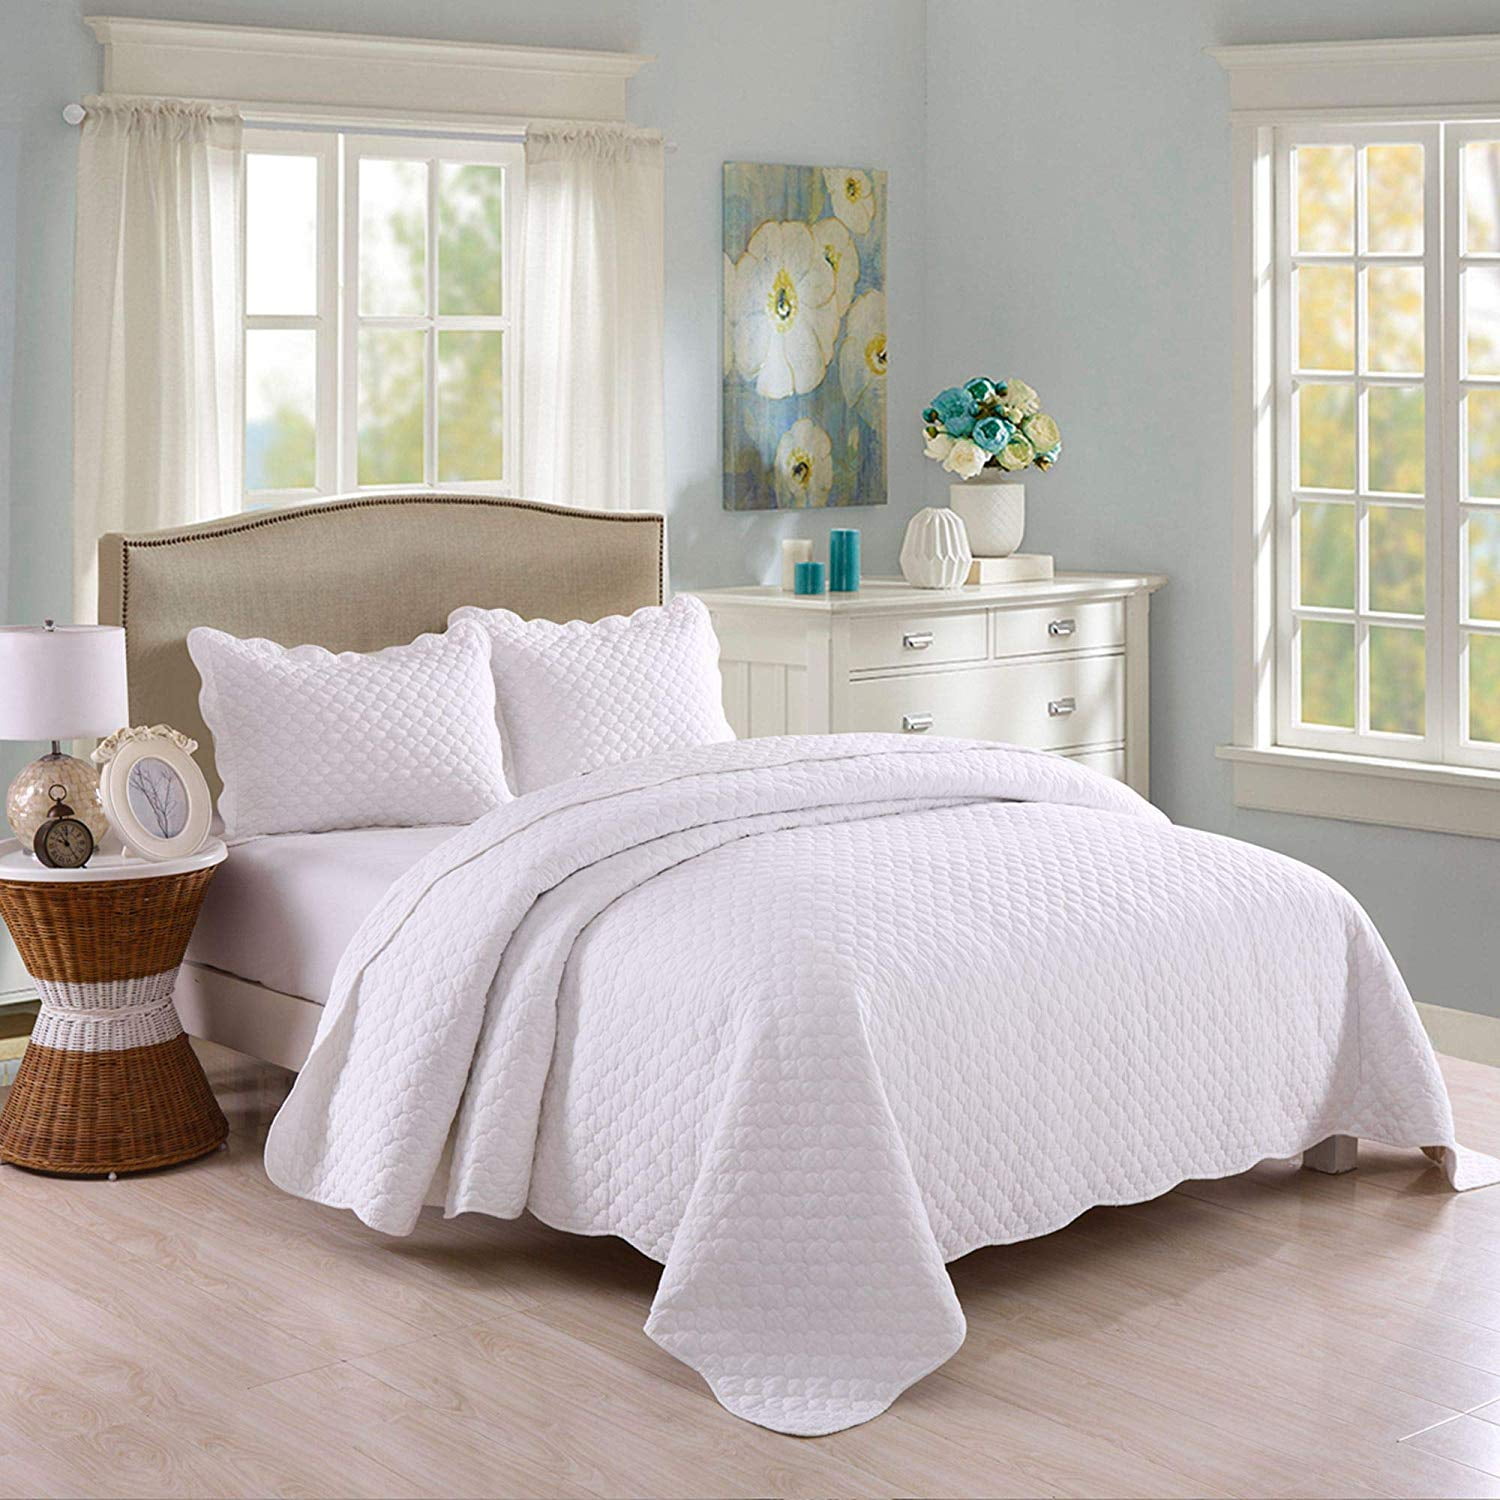 Ivory Details about   LITHER Bedspreads Lightweight Oversized Quilt Machine Washable Coverlet 